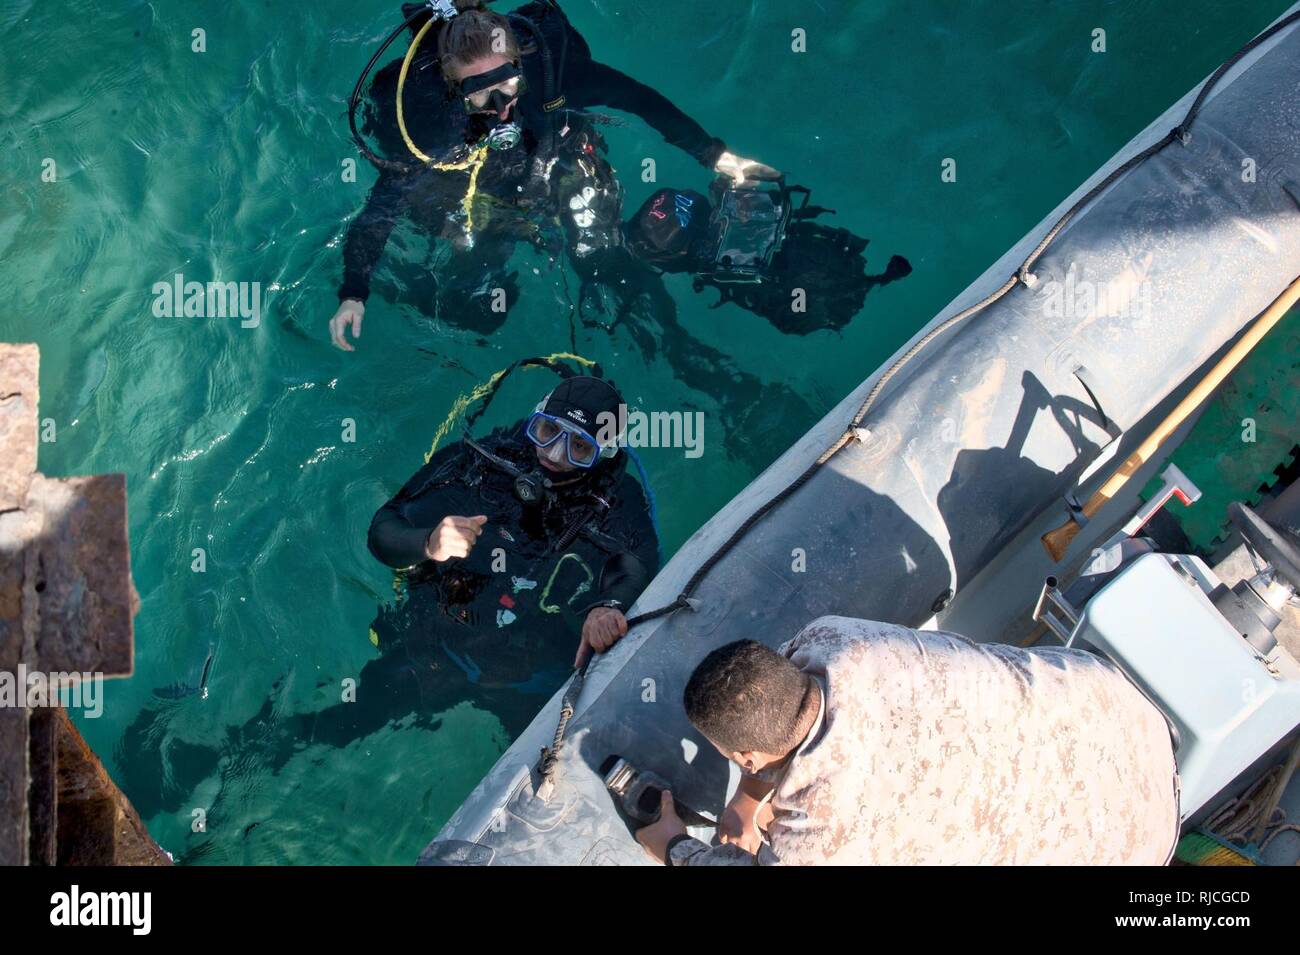 Mohammed Al-Ahmad Naval Base, KUWAIT (Jan. 8, 2018) Explosive Ordnance Disposal Technician 3rd Class Carolyn Willeford, top, assigned to Commander, Task Group 56.1, operates an underwater navigation system during a scuba dive with a Kuwait Naval Force explosive ordnance disposal technician during a training evolution as part of exercise Eager Response 18. Eager Response 18 is a bilateral explosive ordnance disposal military exercise between the State of Kuwait and the United States. The exercise fortifies military-to-military relationships between the Kuwait Naval Force and U.S. Navy, advances Stock Photo